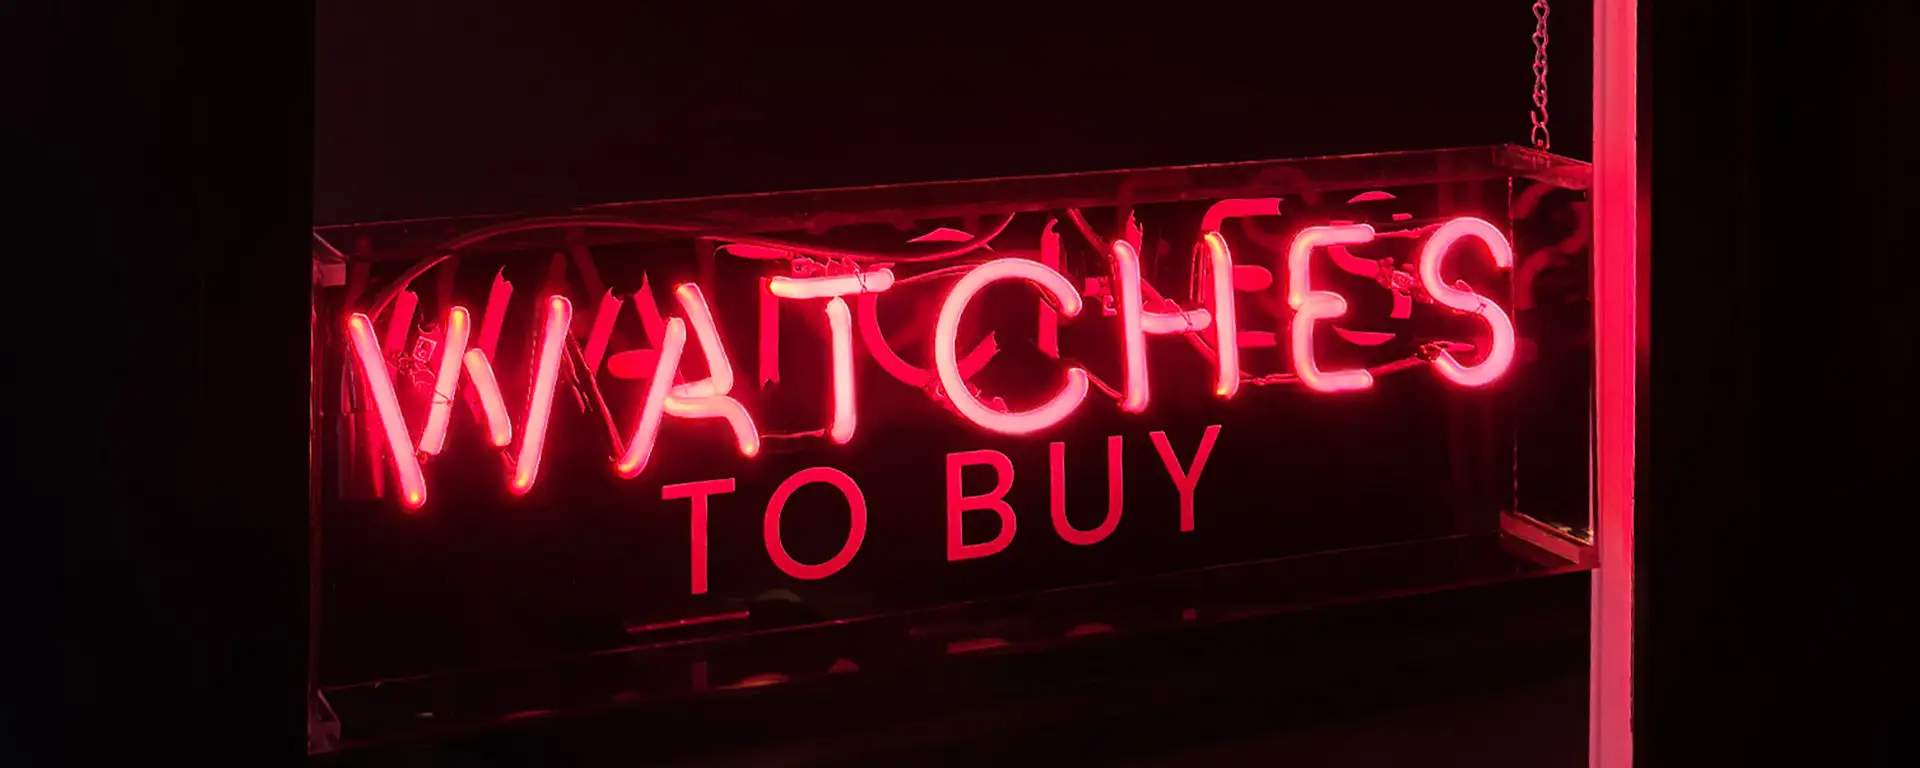 Watches To Buy Neon Sign In Front Window